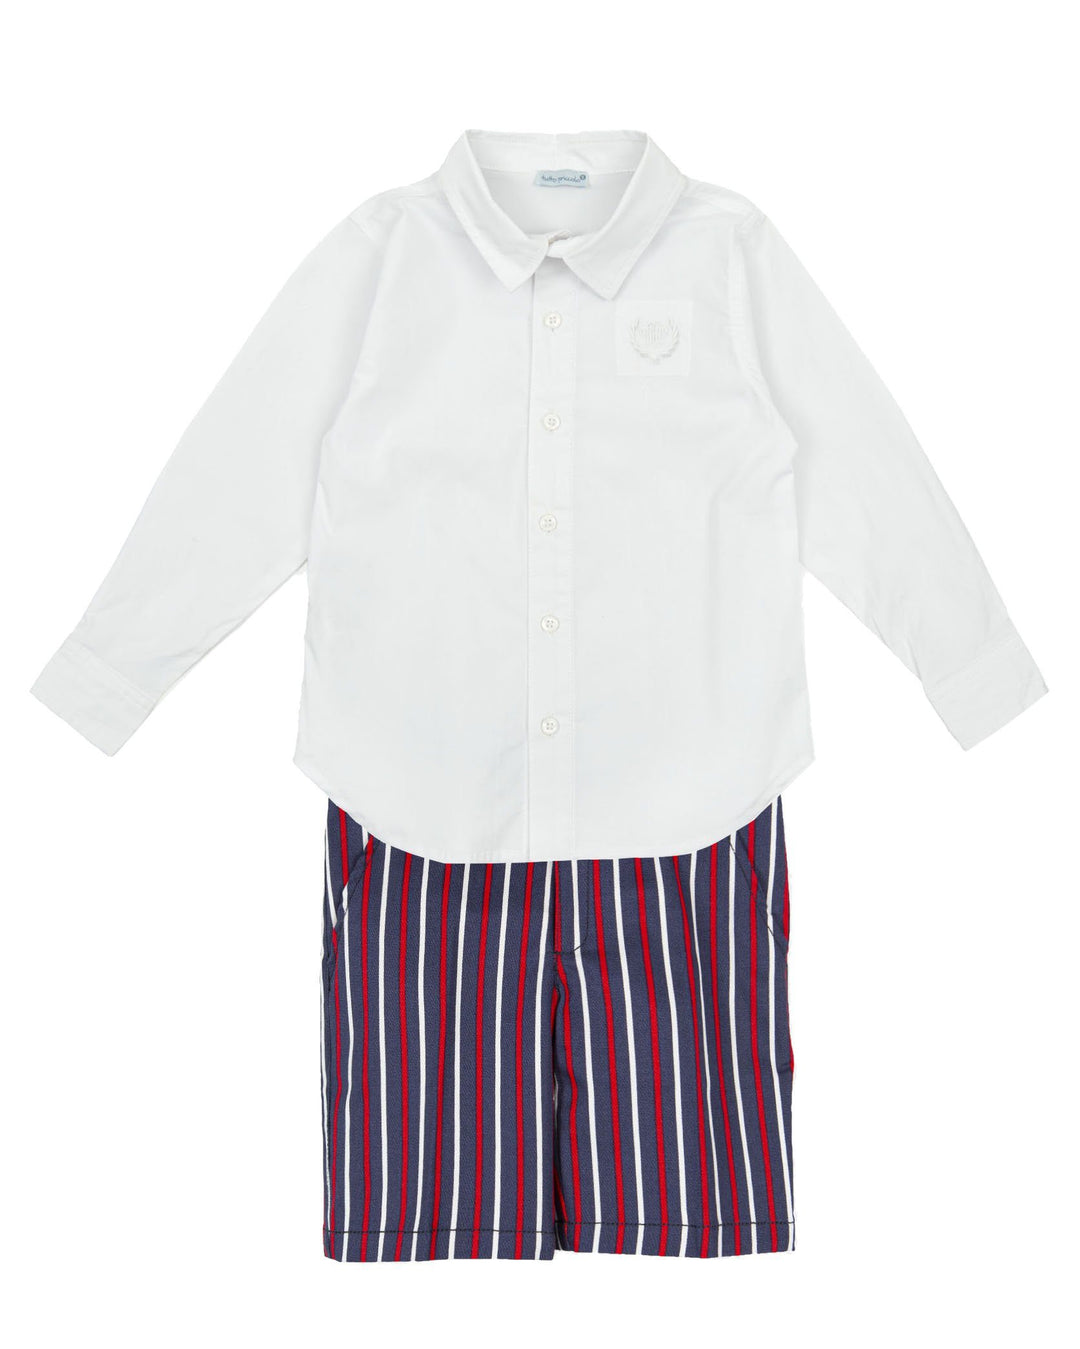 Tutto Piccolo "David" Shirt & Navy & Red Striped Shorts | Millie and John